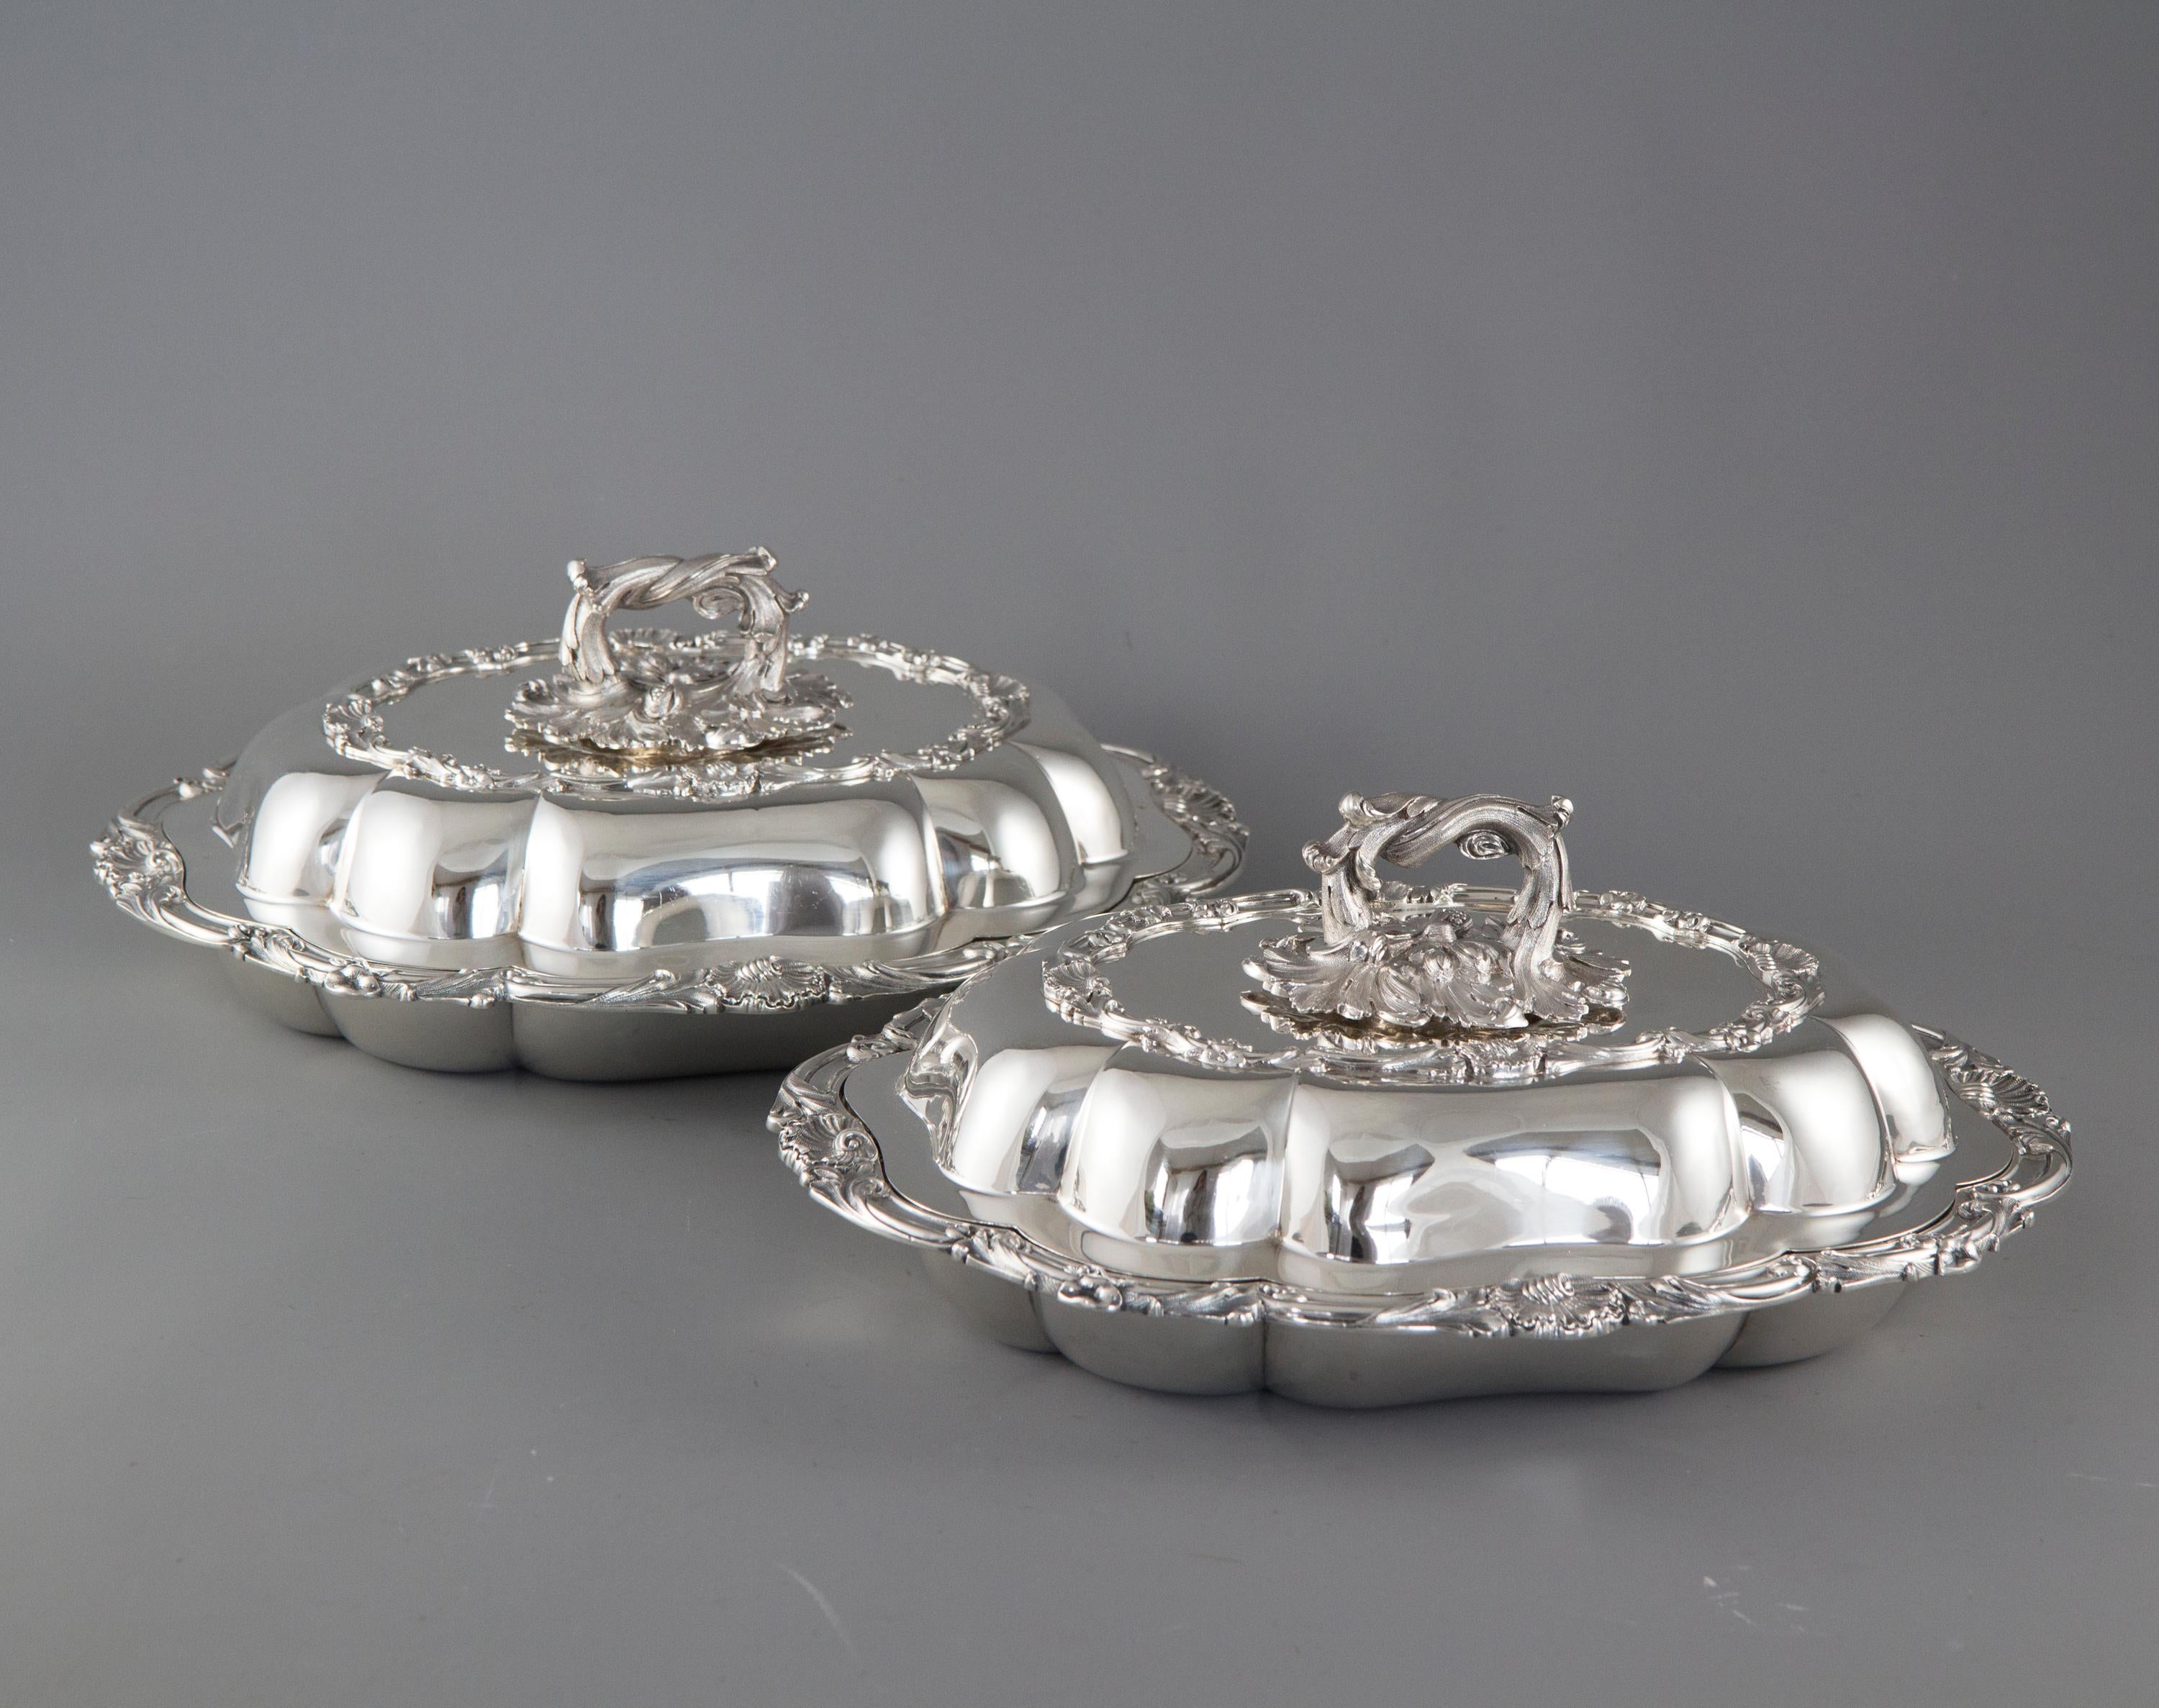 British Pair of Victorian Silver Entree or Serving Dishes, Barnards, London, 1855